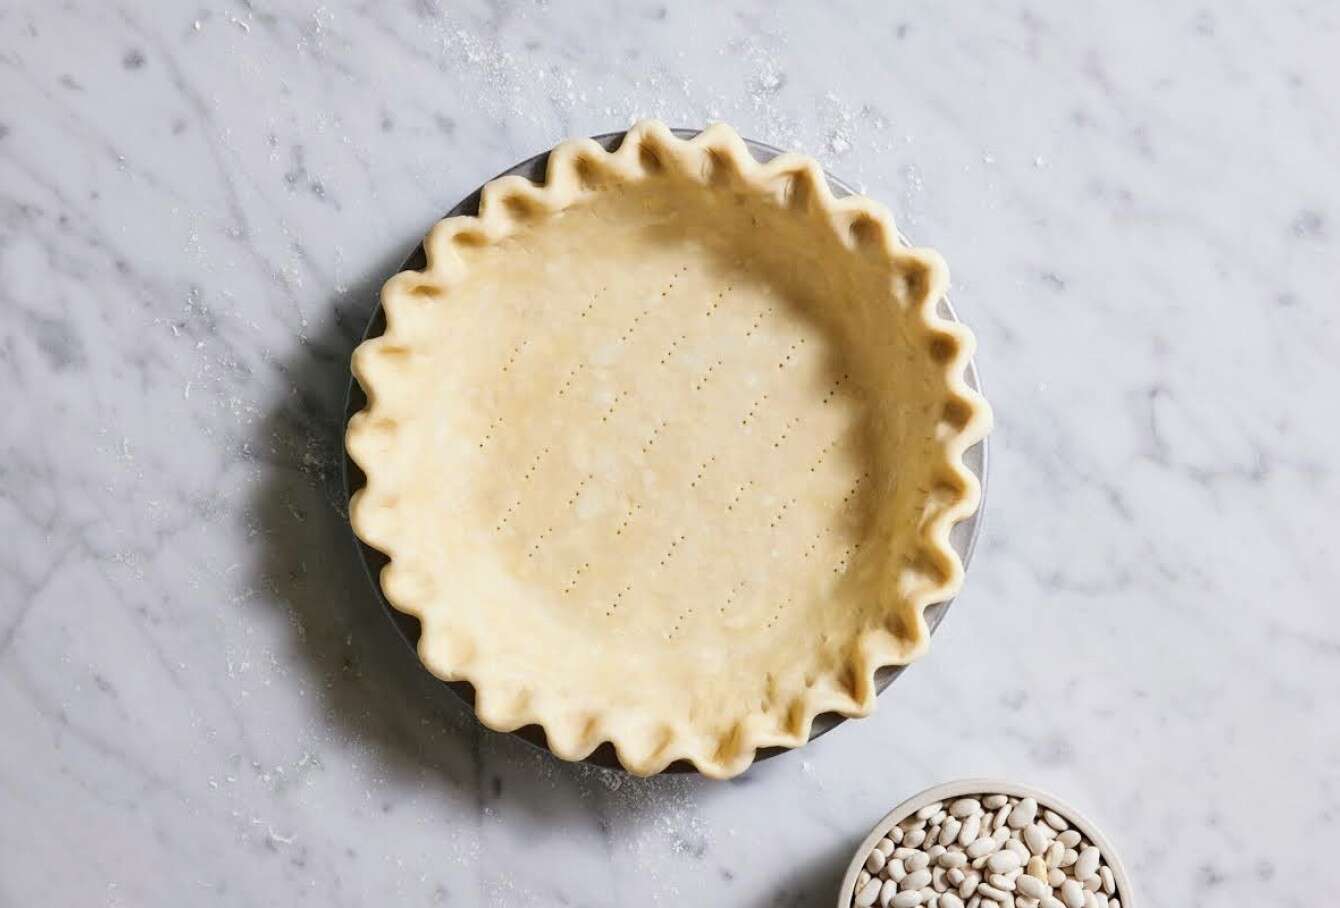 How to keep pie crust from shrinking